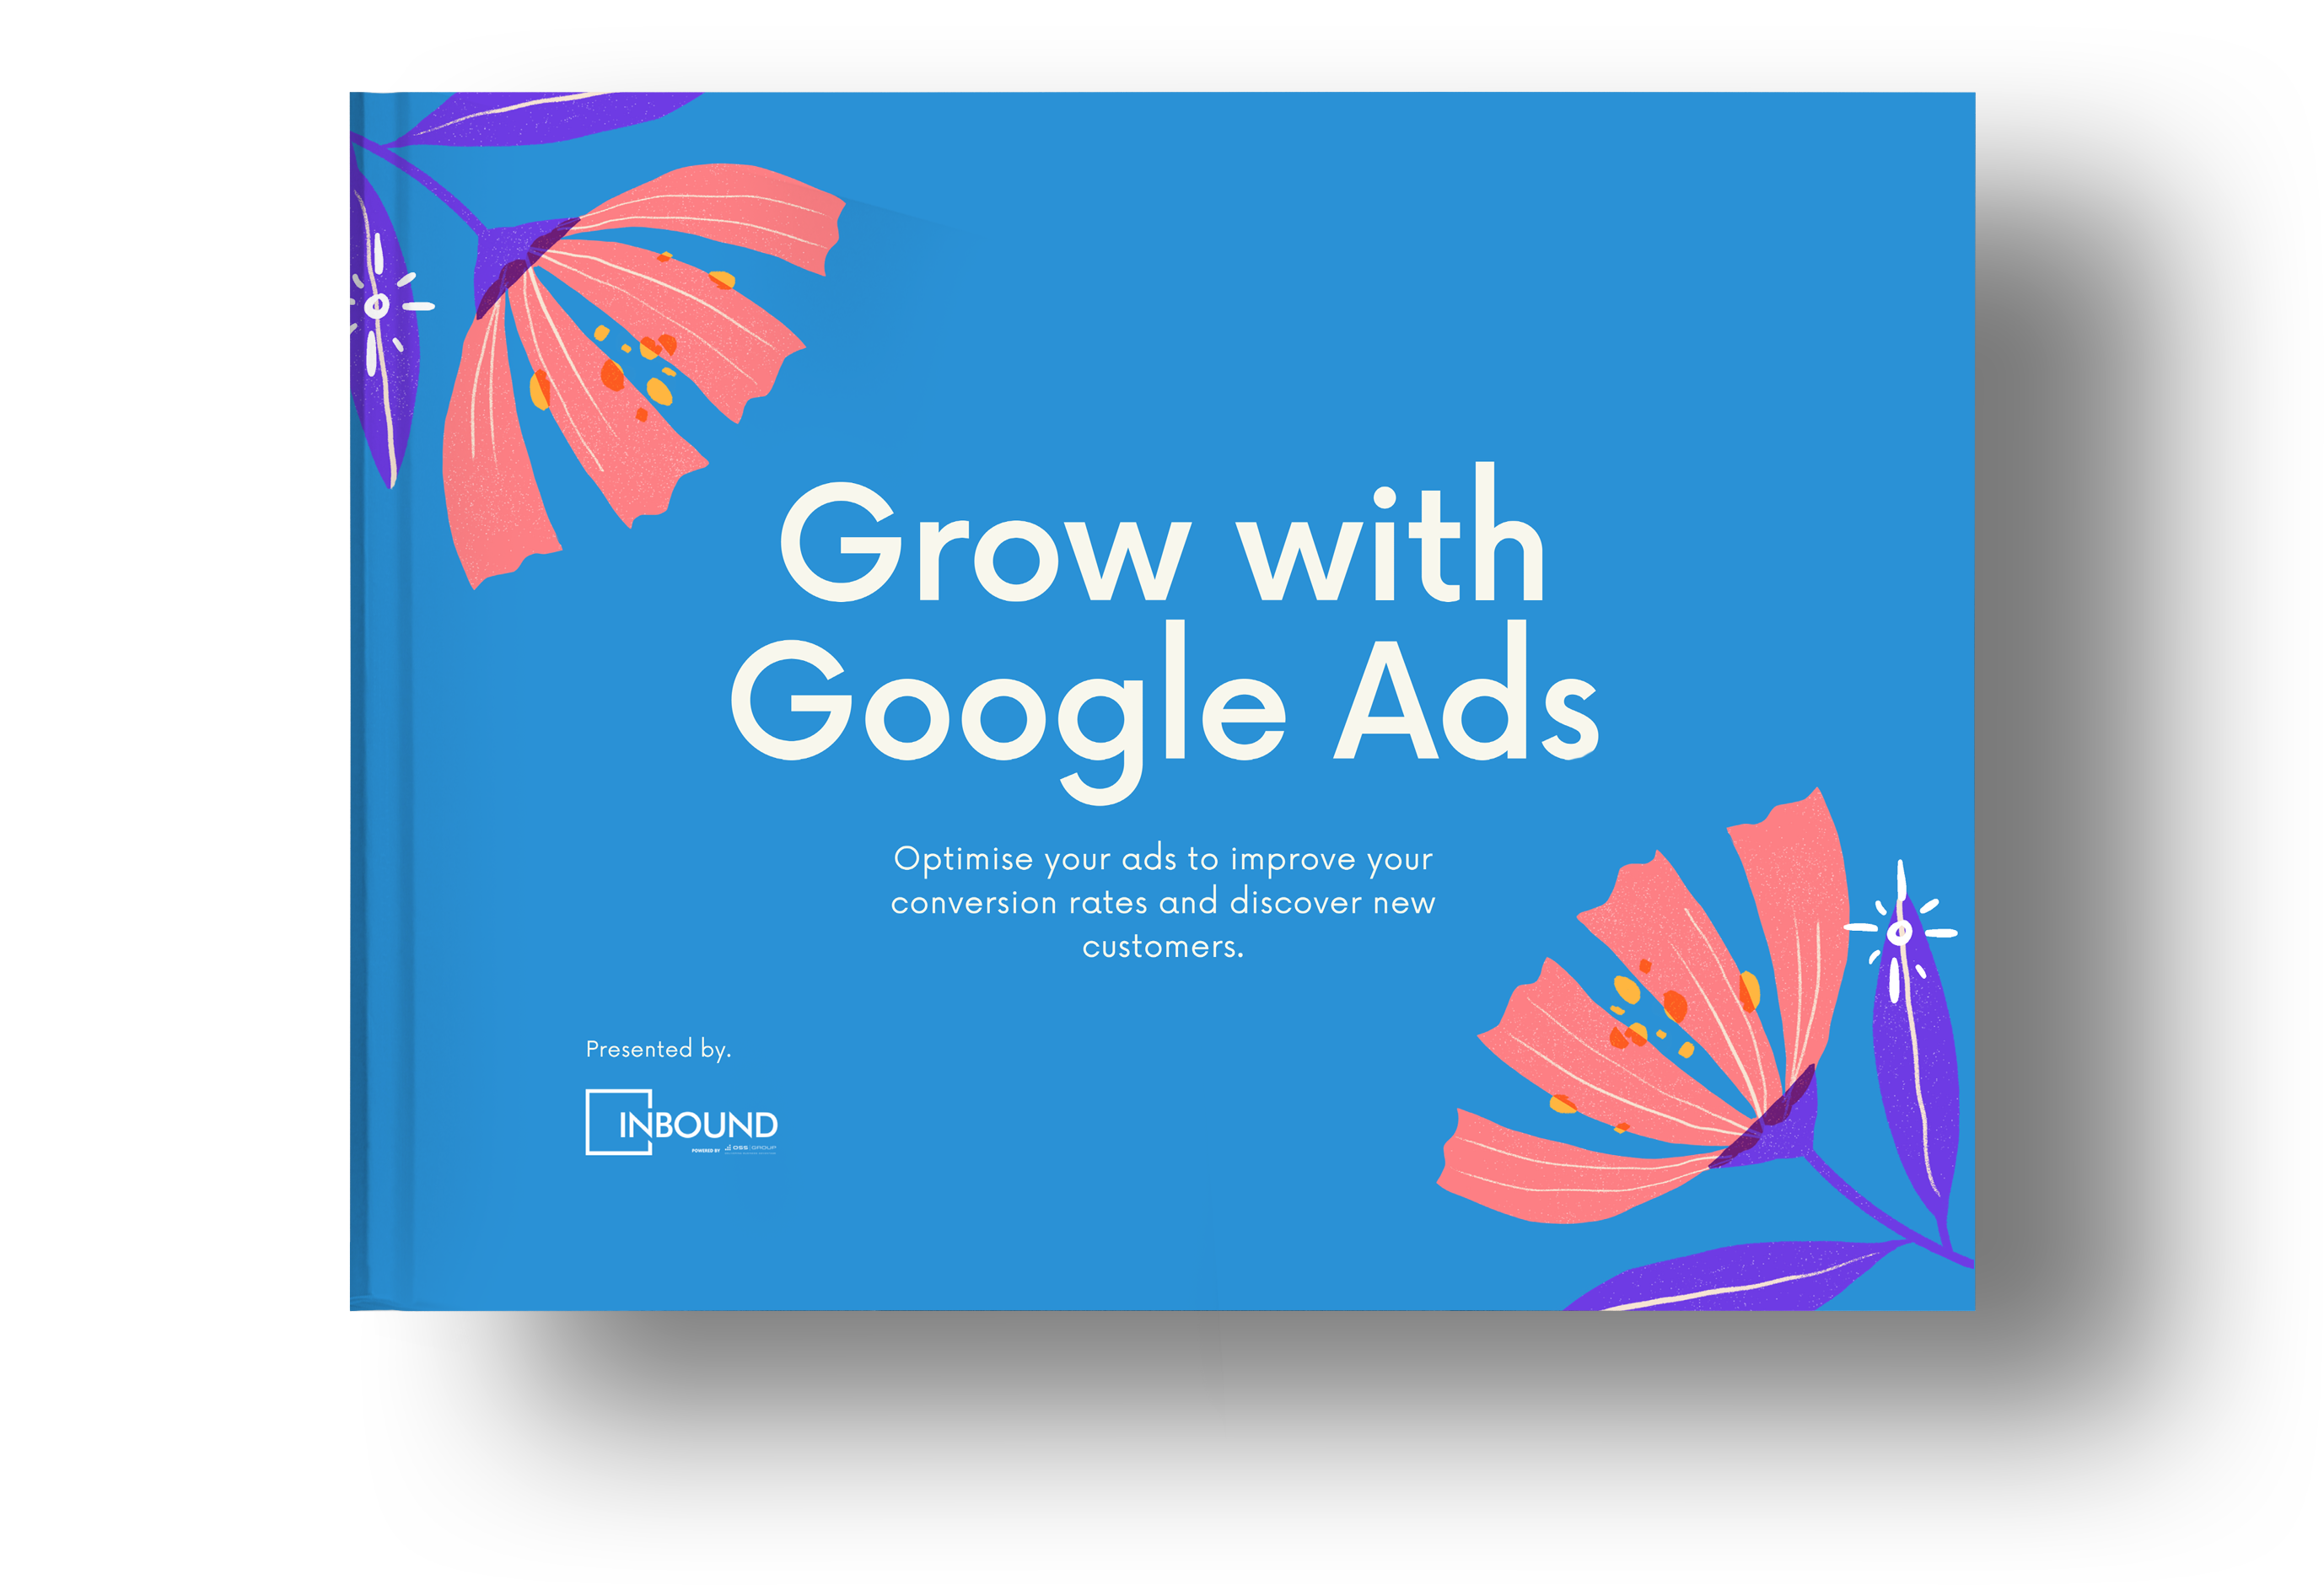 Get Started With Google Ads Thumbnail - BG White